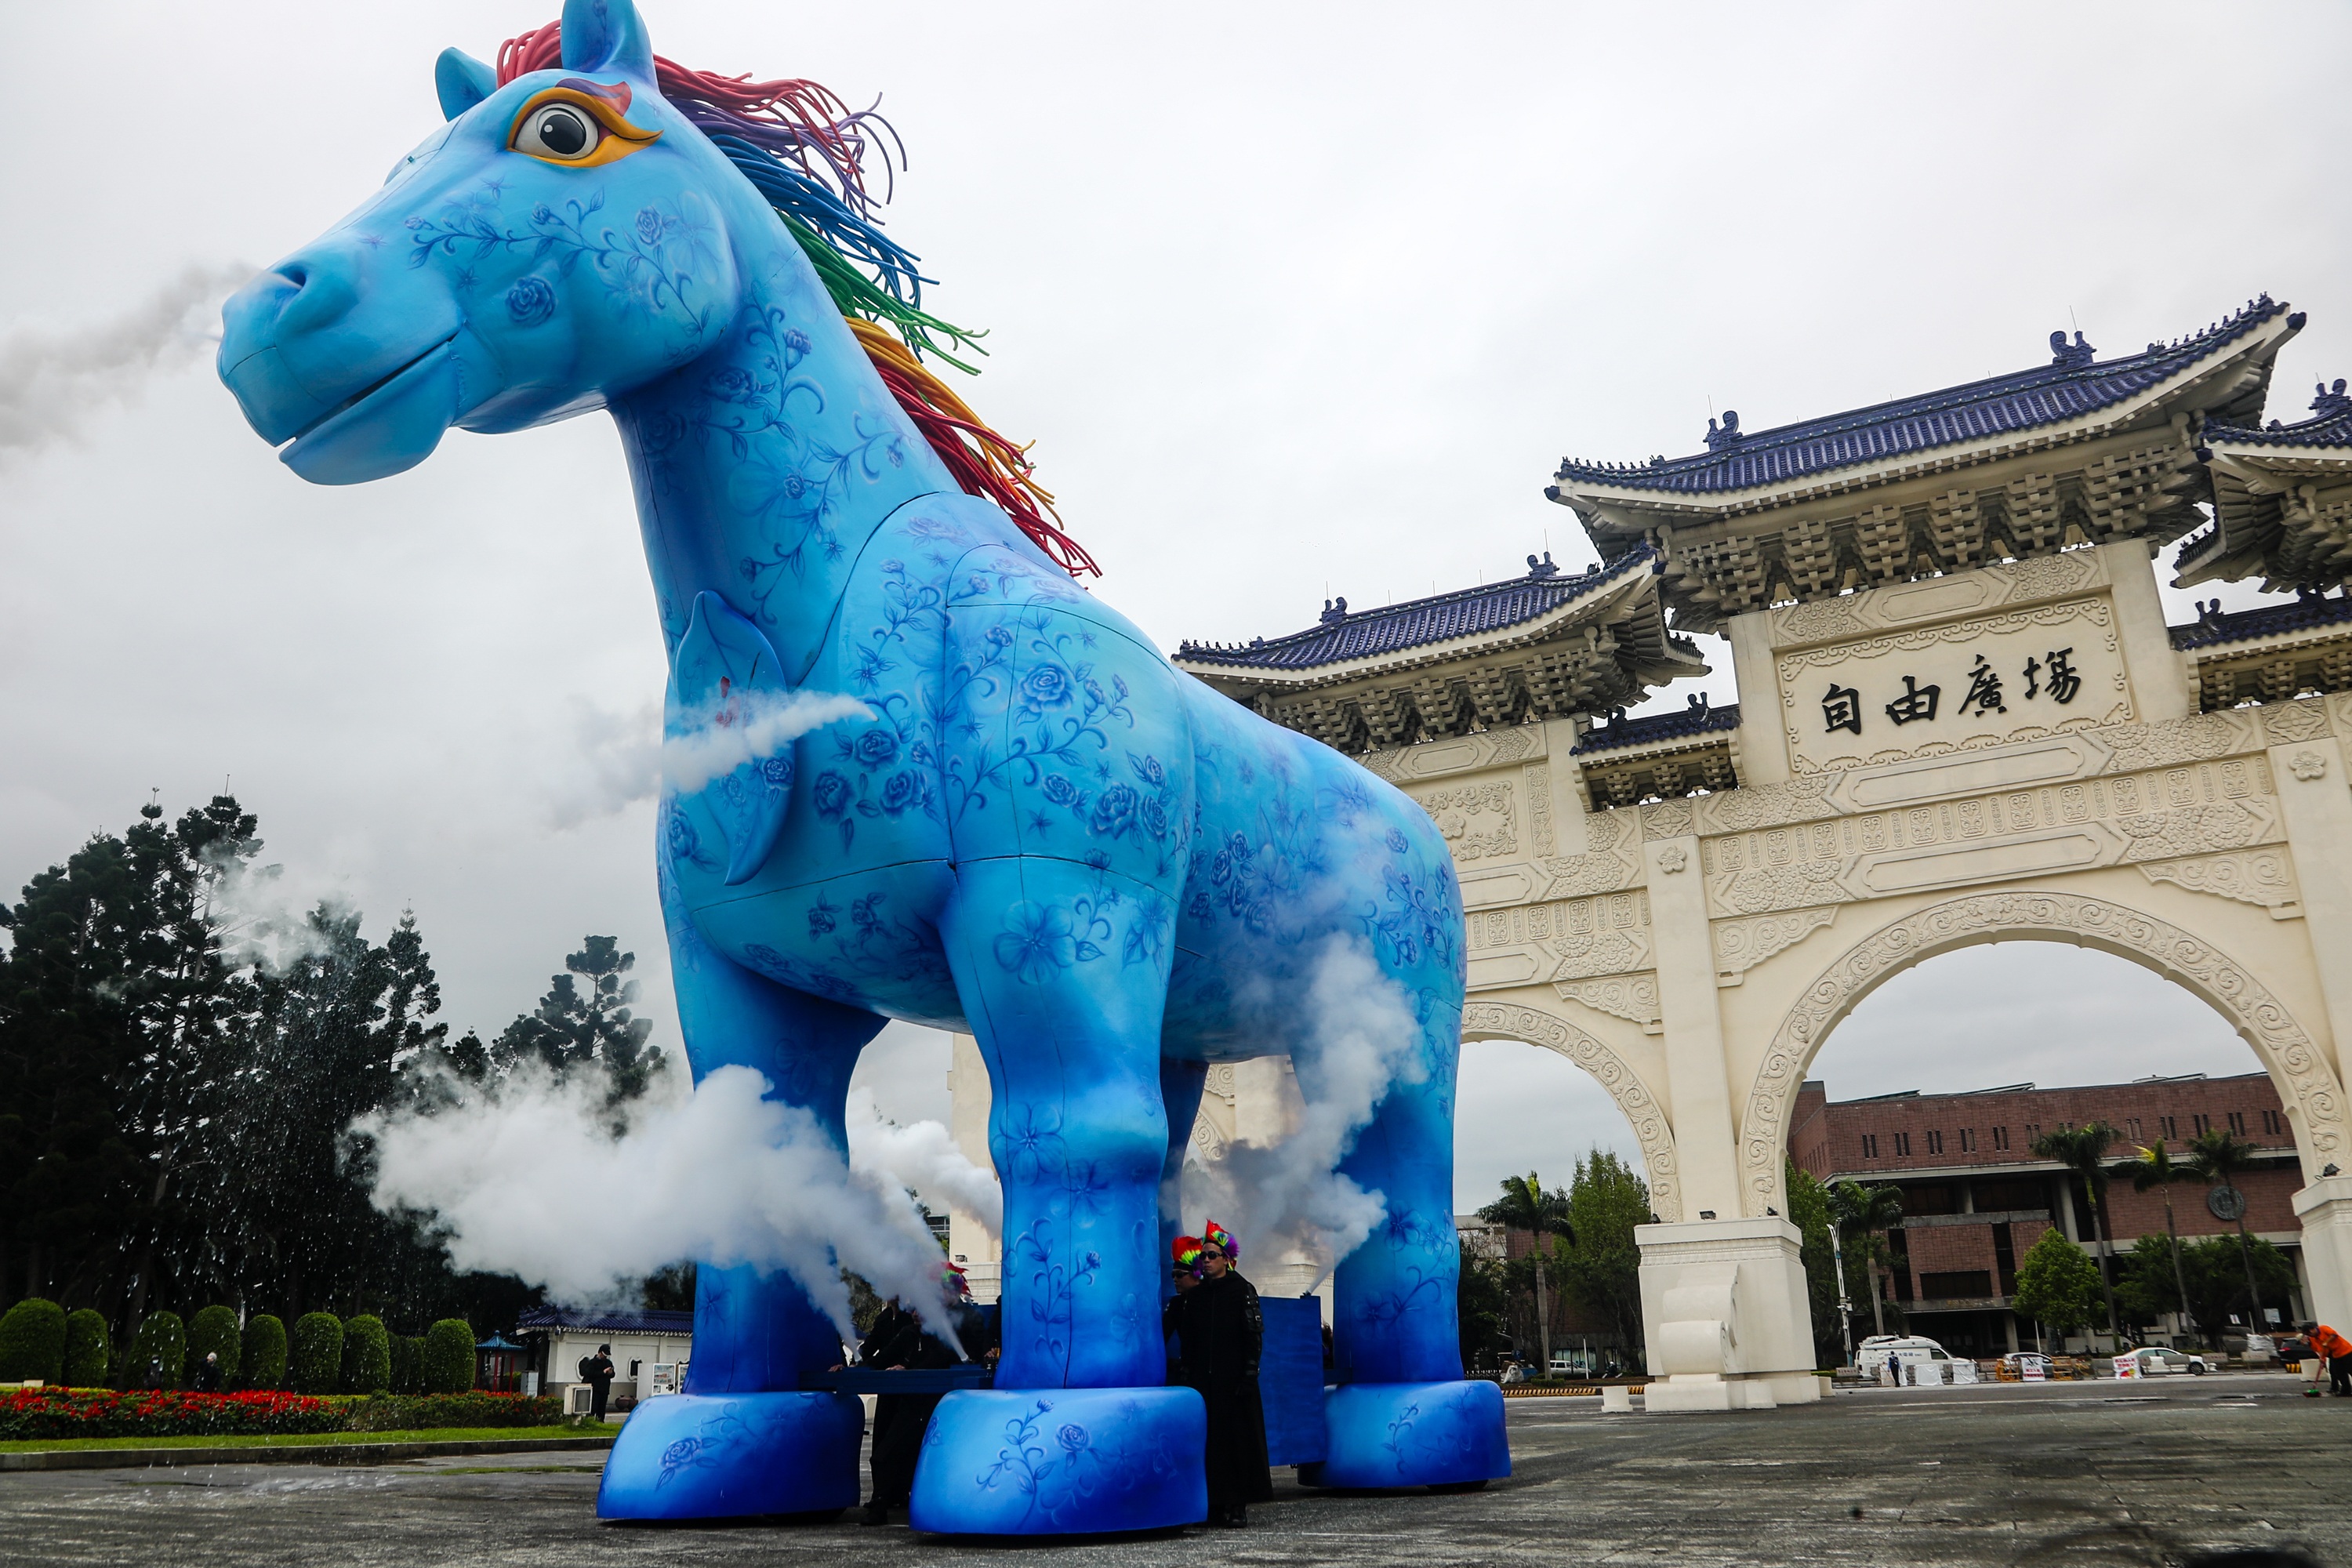 Paper Windmill Theatre exhibits giant blue horse statue in front of Sun Yat-sen Memorial Hall